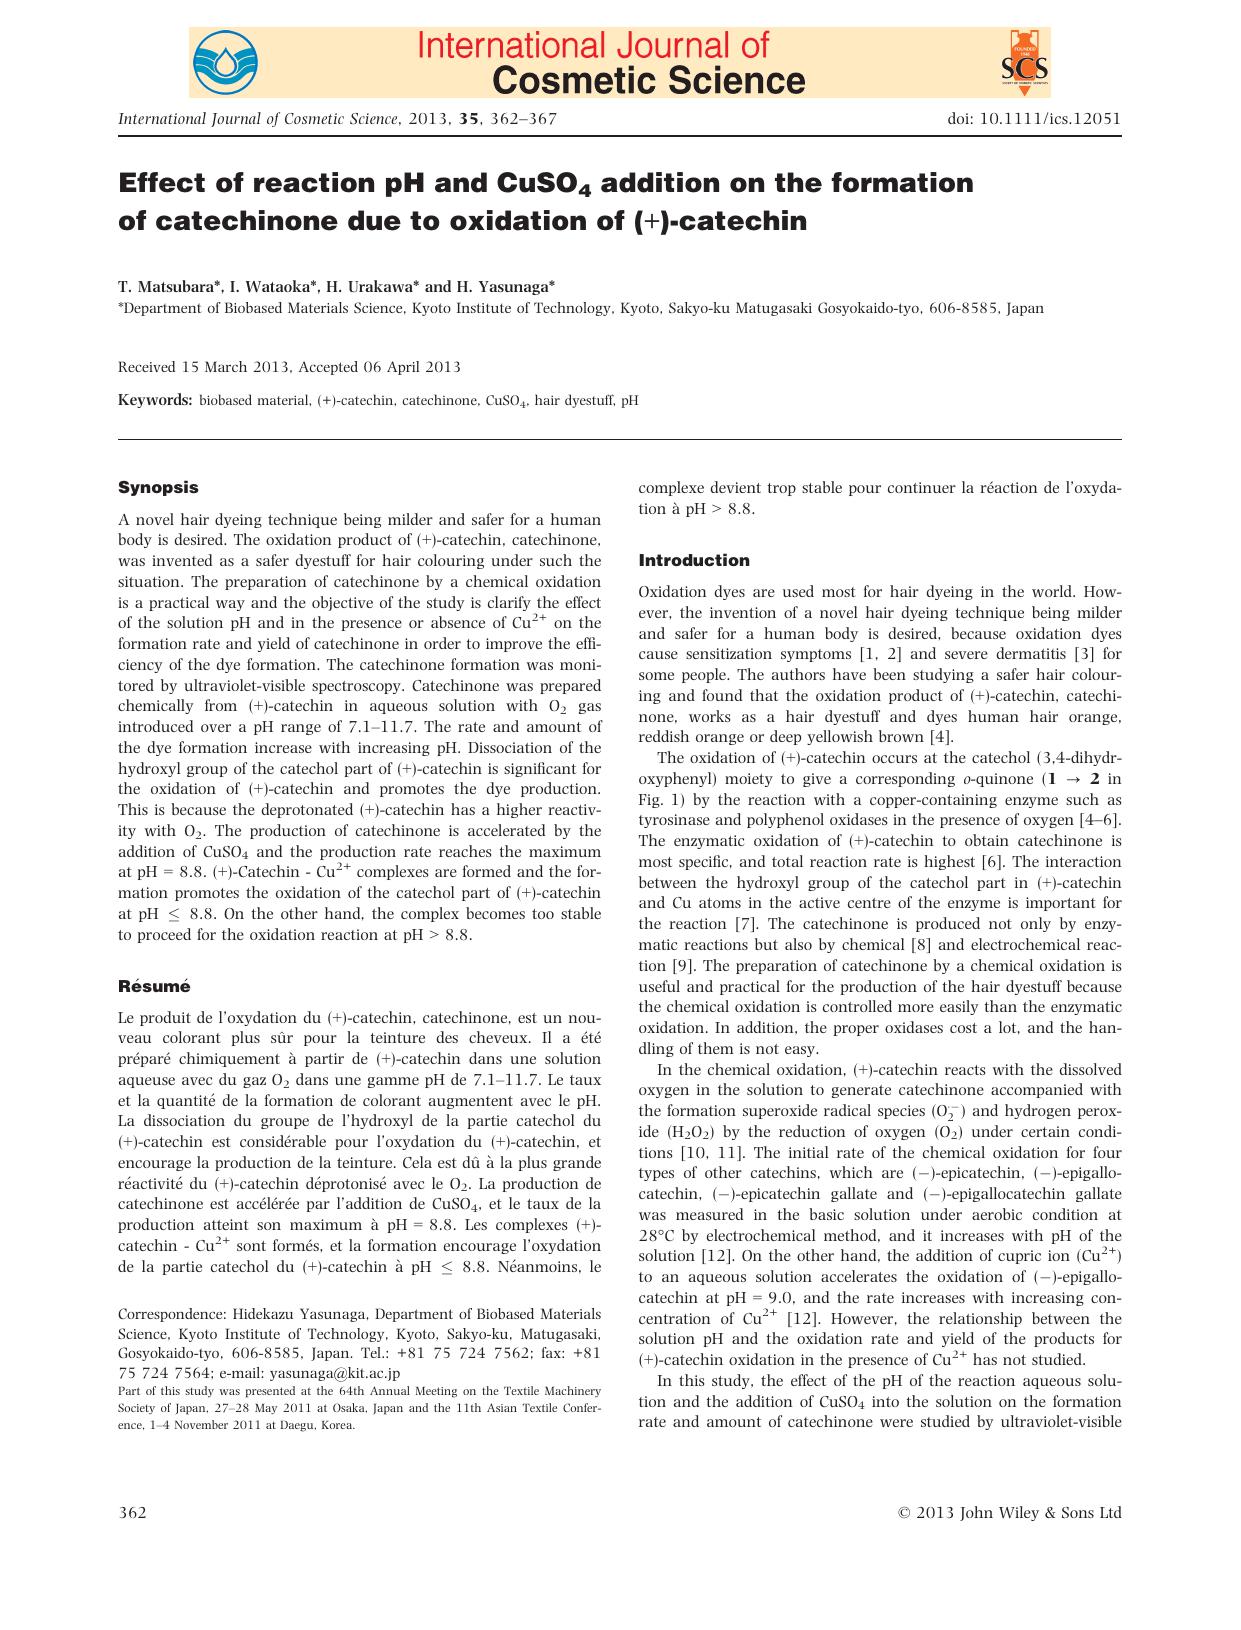 Effect of reaction pH and CuSO4 addition on the formation of catechinone due to oxidation of ()catechin by Unknown